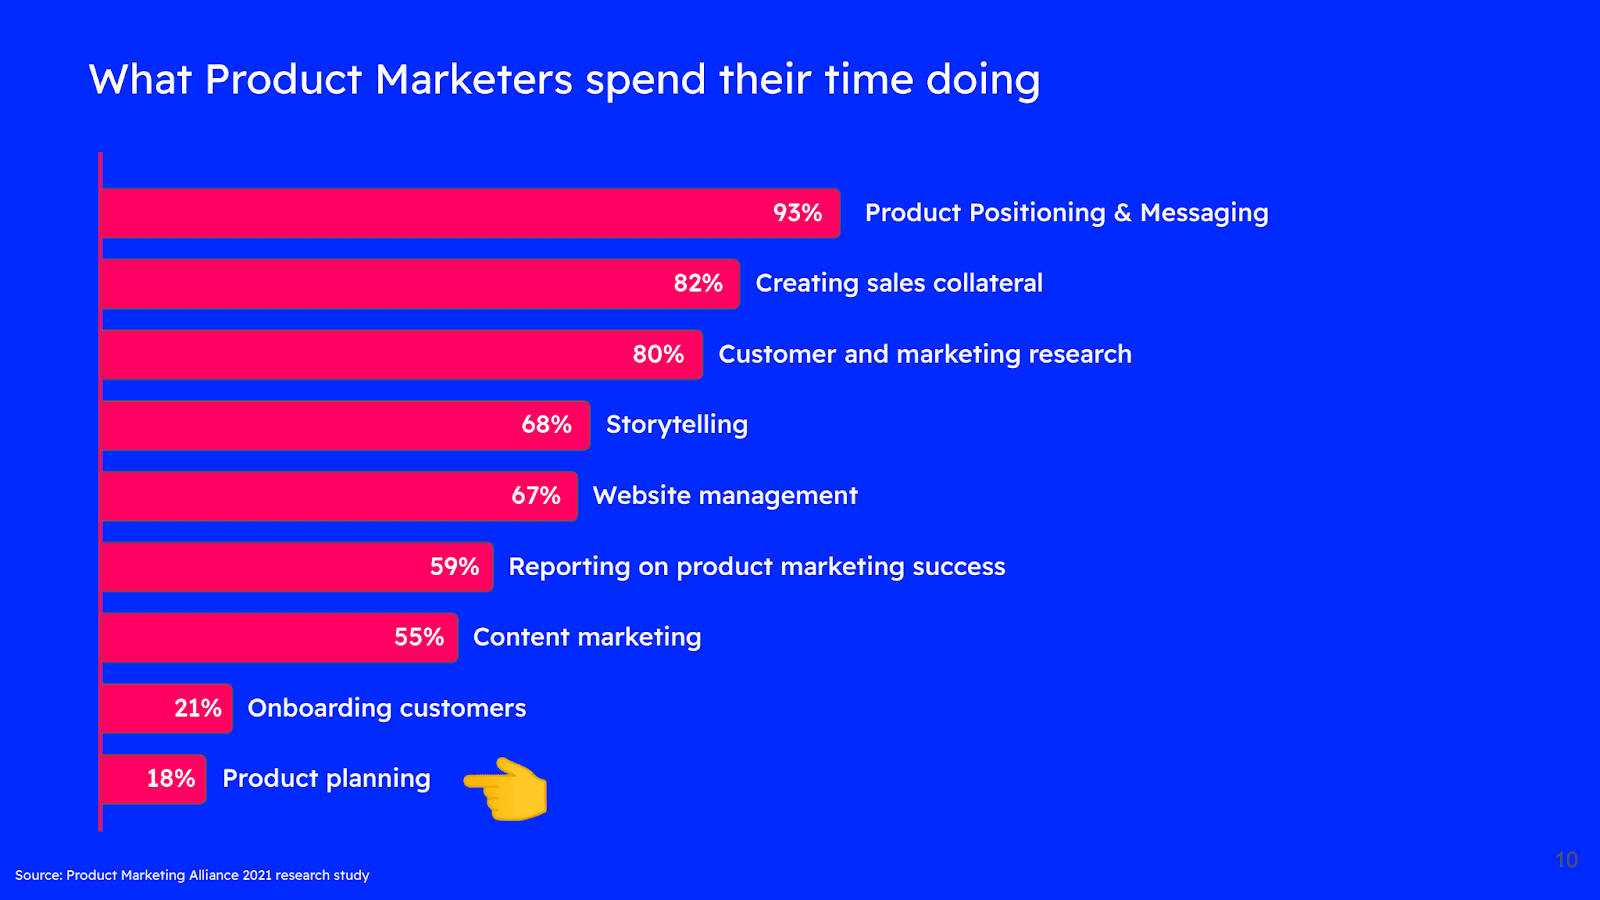 State of Product Marketing report 2021 results: What product marketers spend their time doing.